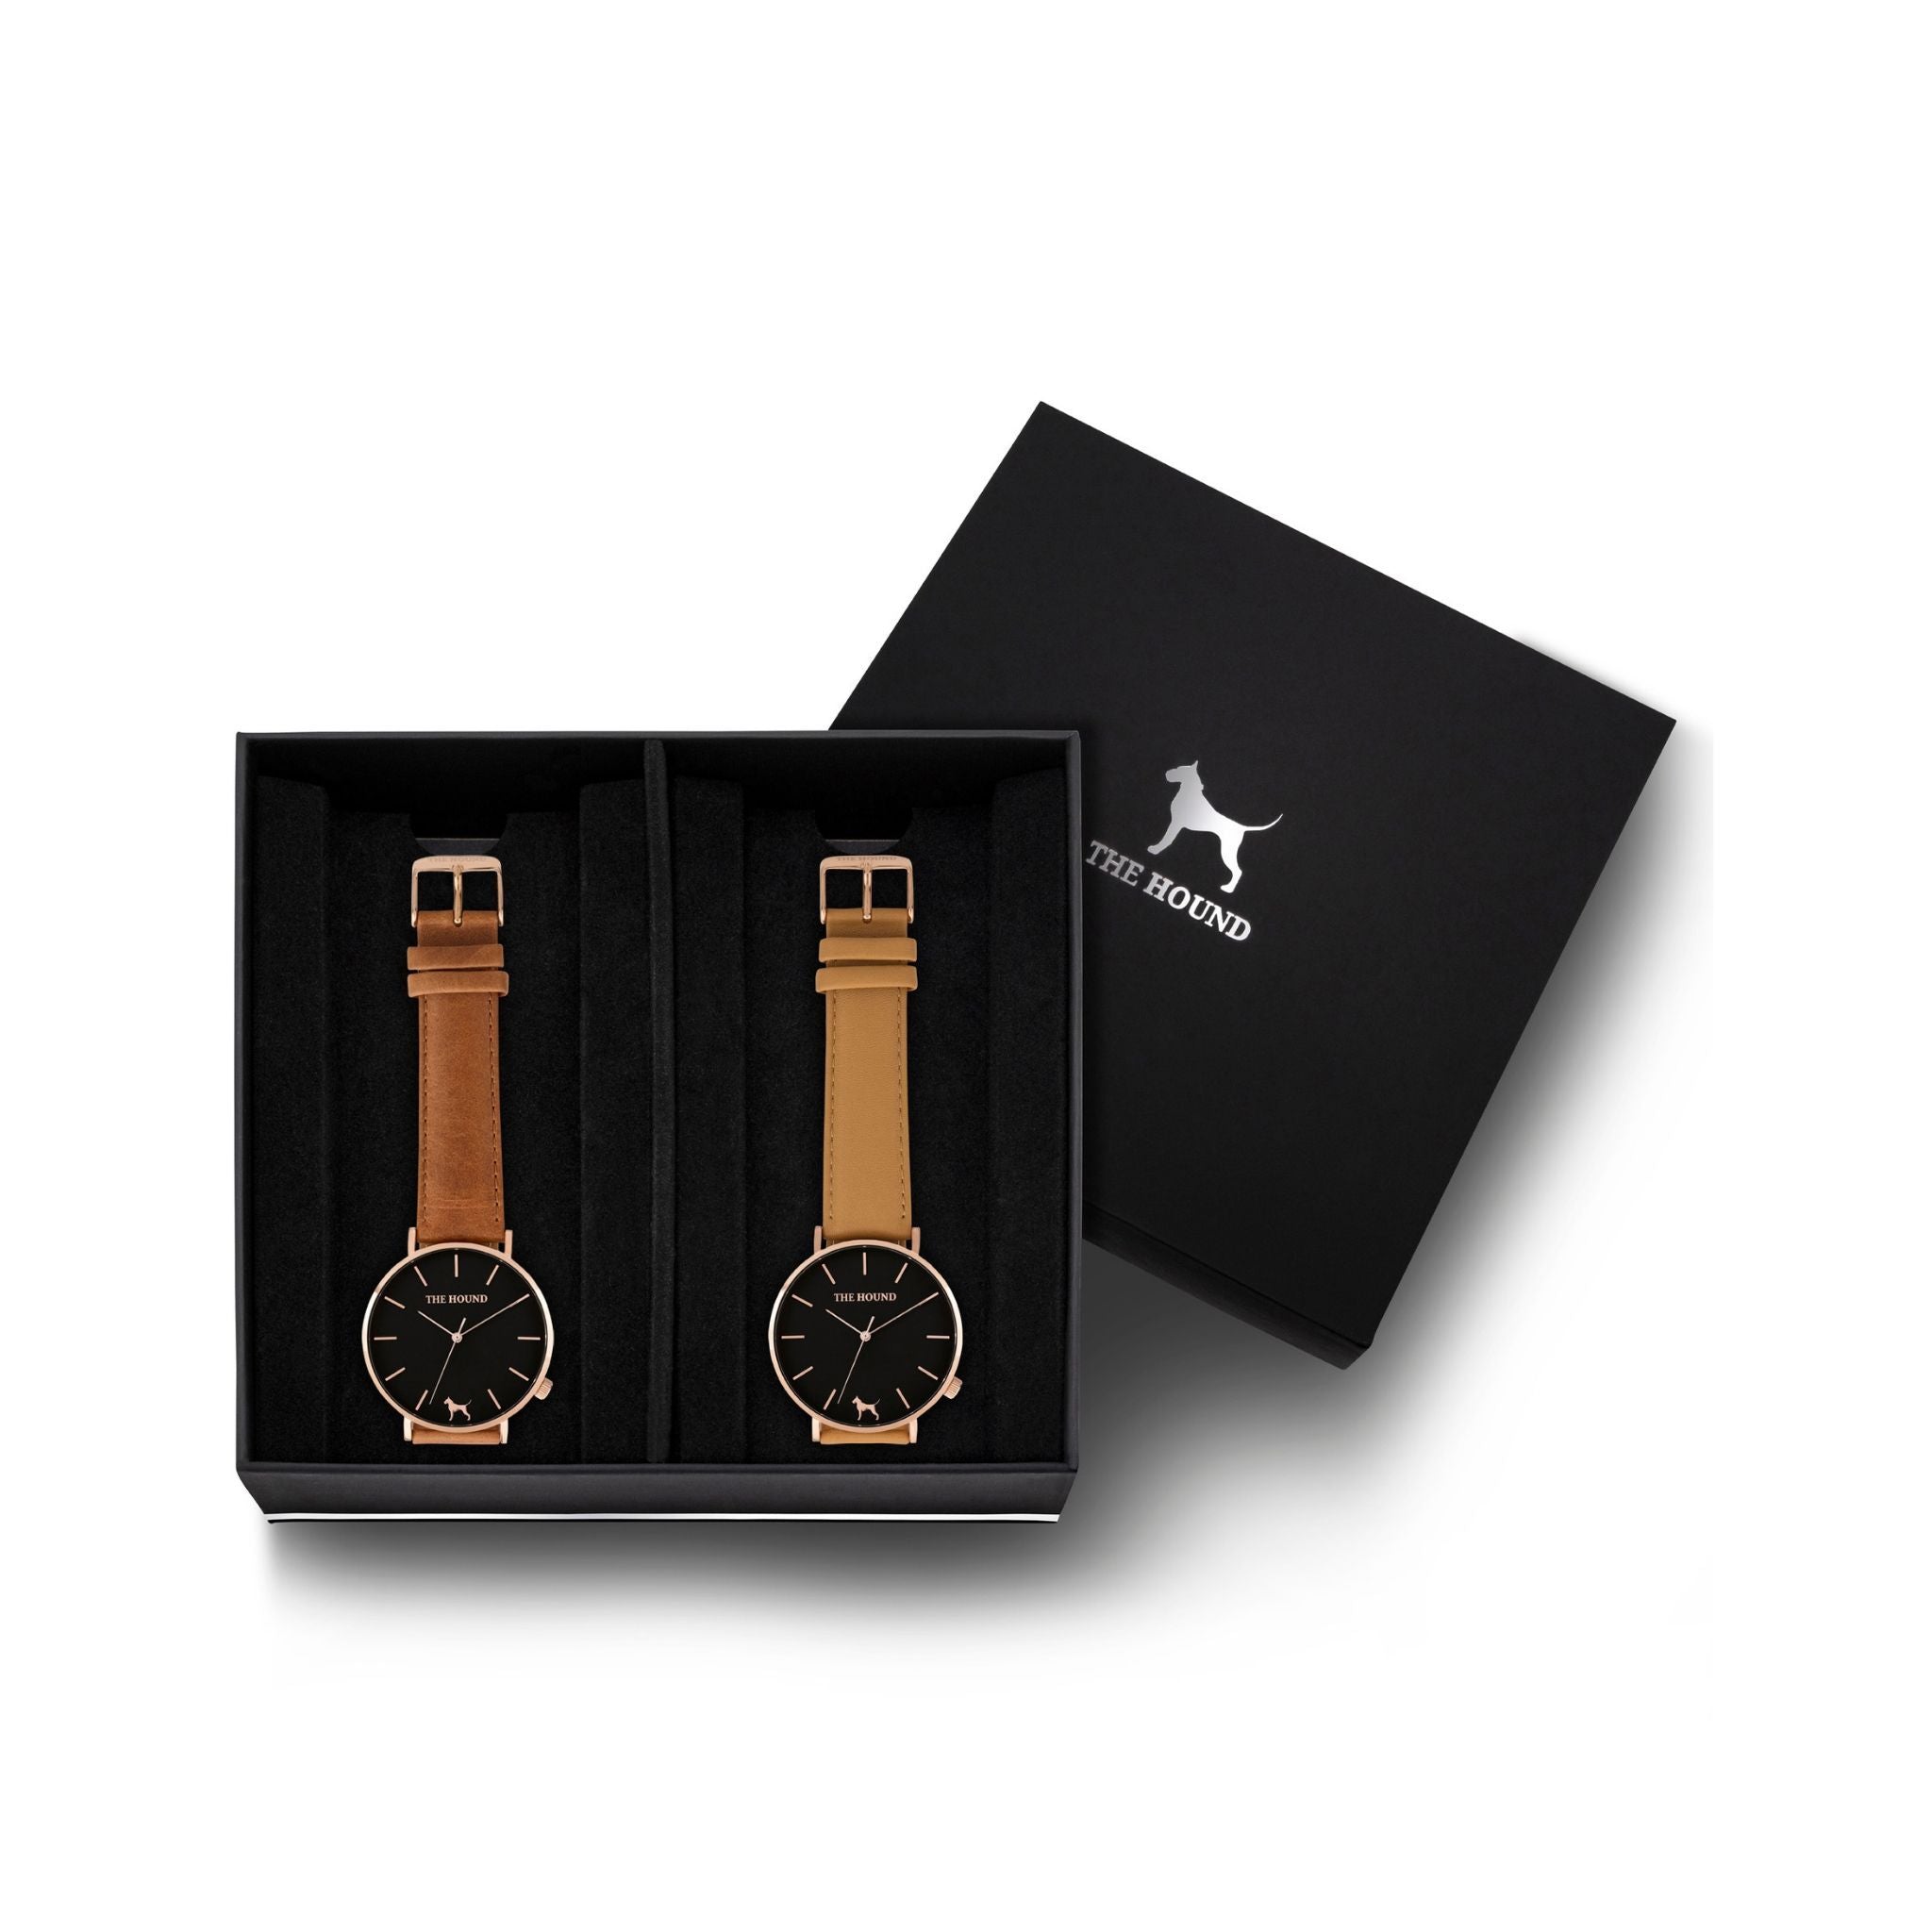 Custom gift set - Rose gold and black watch with stitched tan genuine leather band and a rose gold and black watch with stitched camel genuine leather band